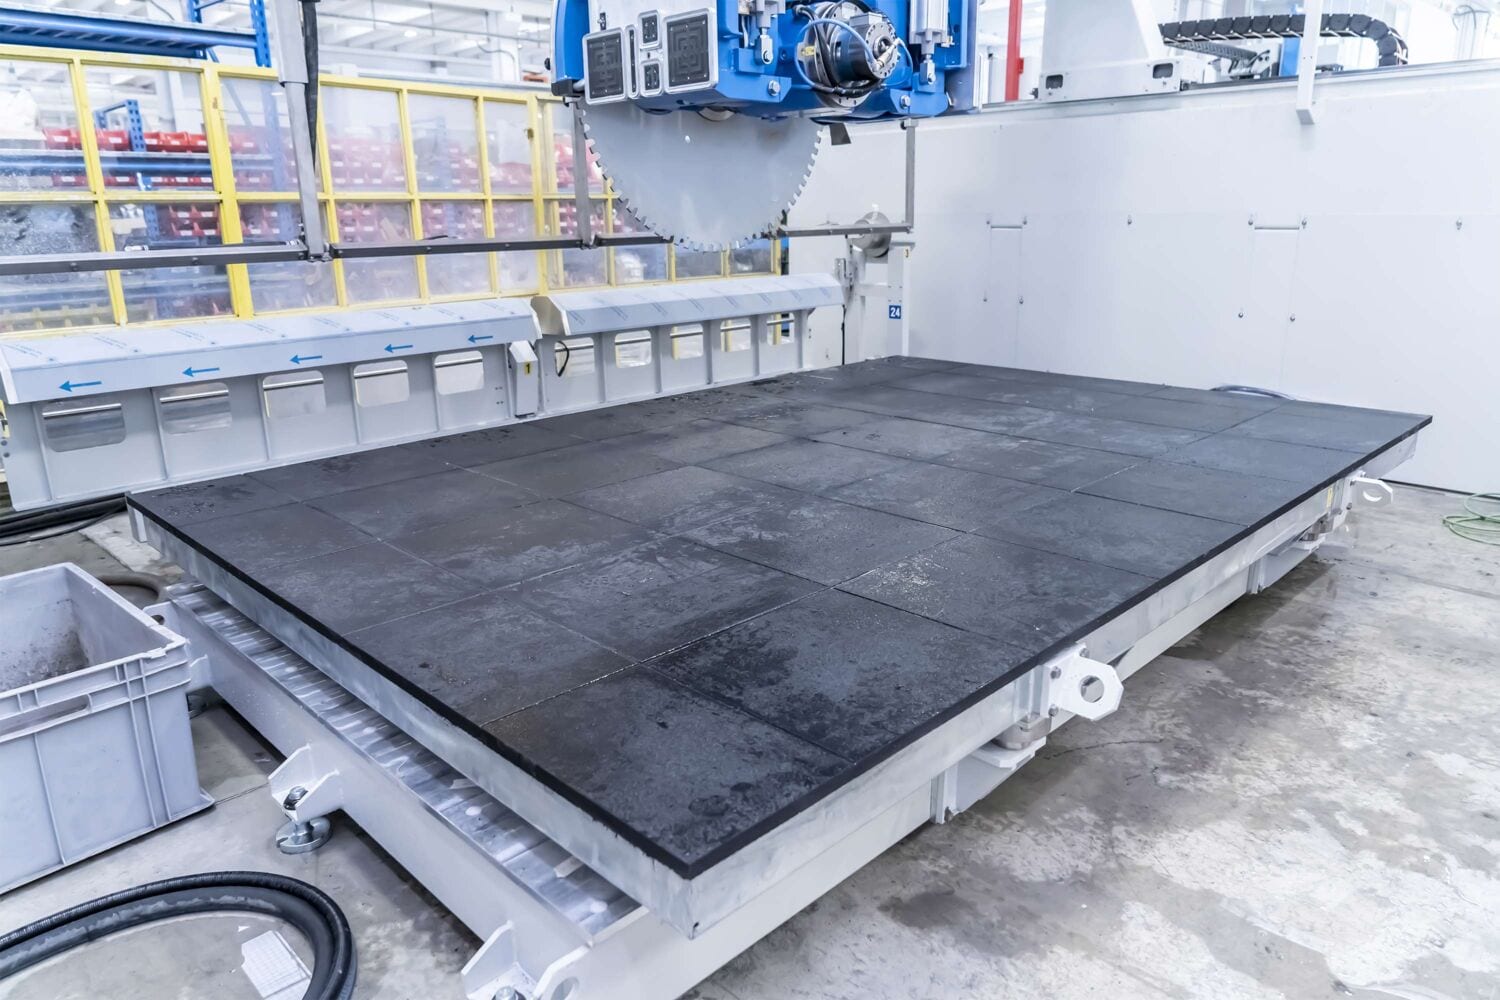 Convert a machining center into a Bridge Saw? You can with Cms Stone Technology!